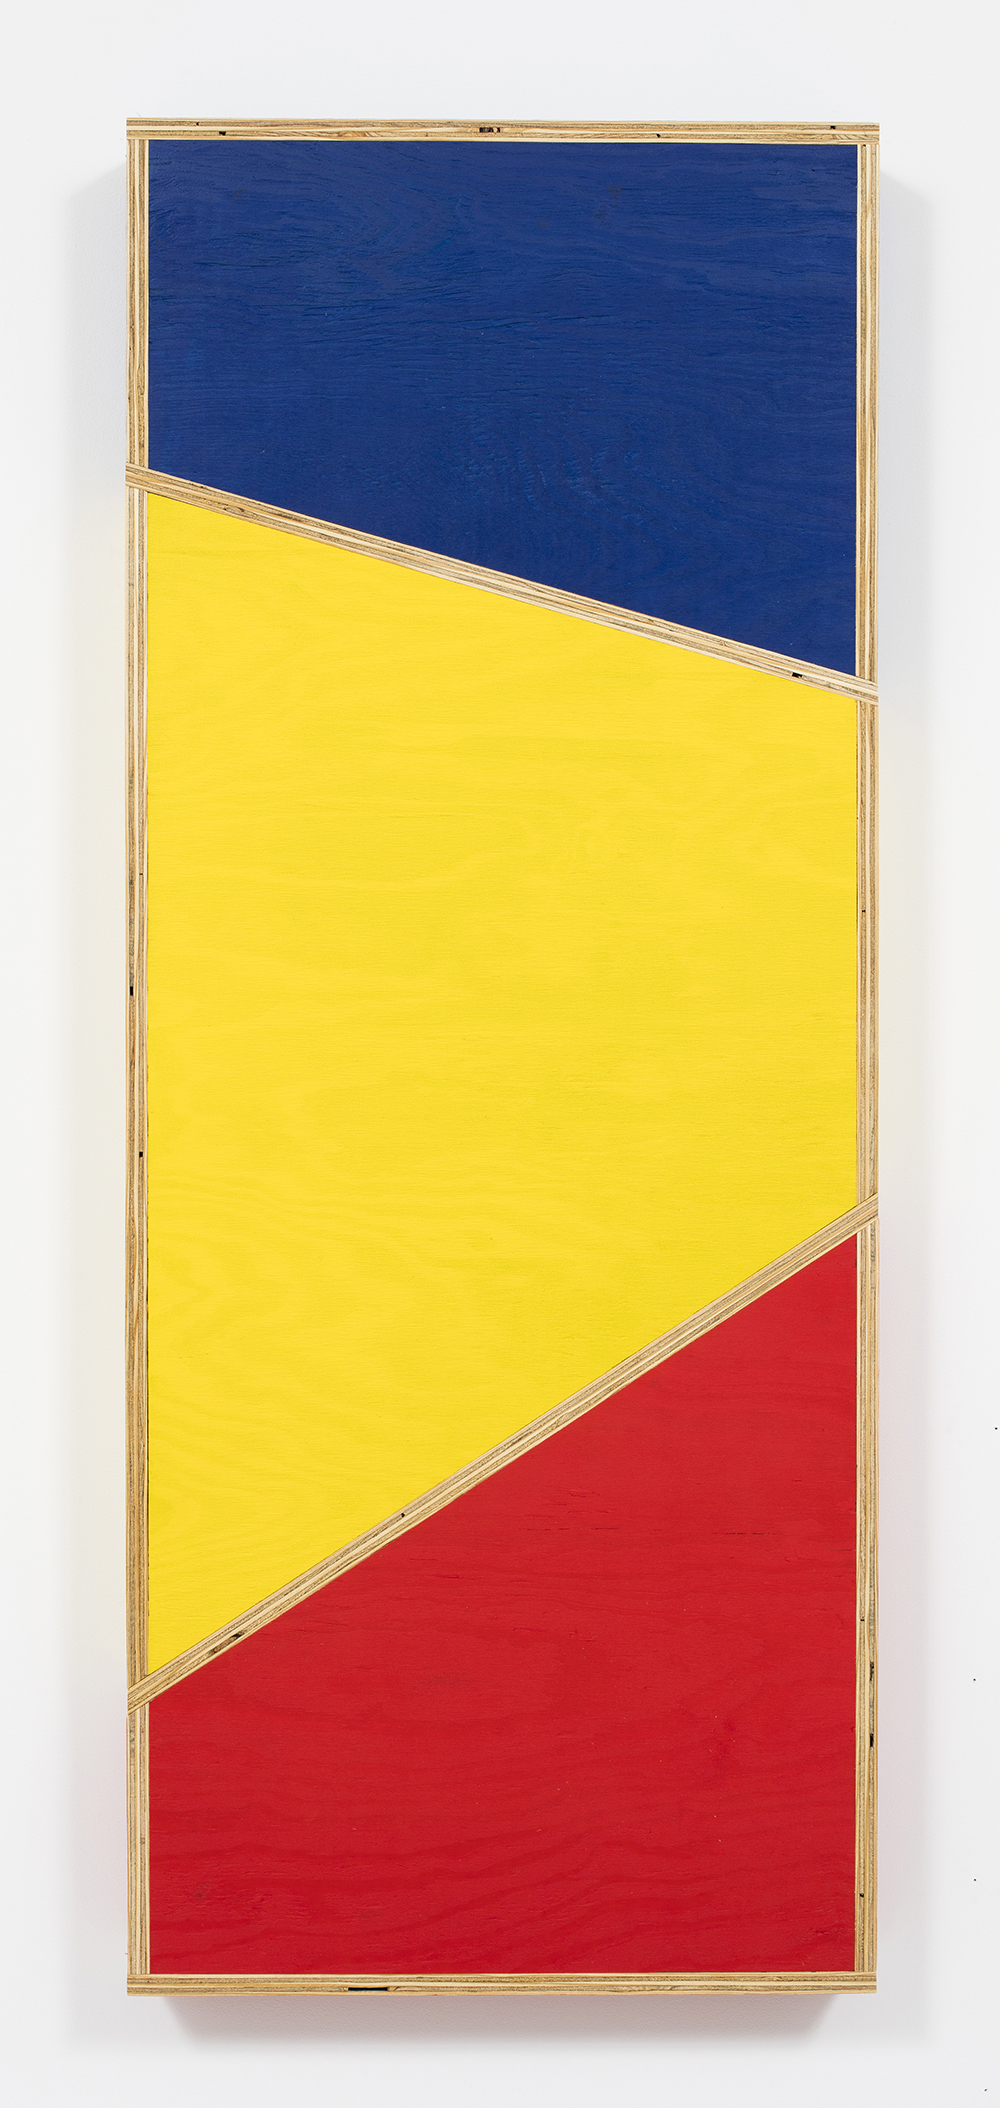 G.T. Pellizzi. <em>Transitional Geometry in Red, Yellow and Blue (Figure 33)</em>, 2016. Eggshell acrylic on plywood, 60 x 24 inches